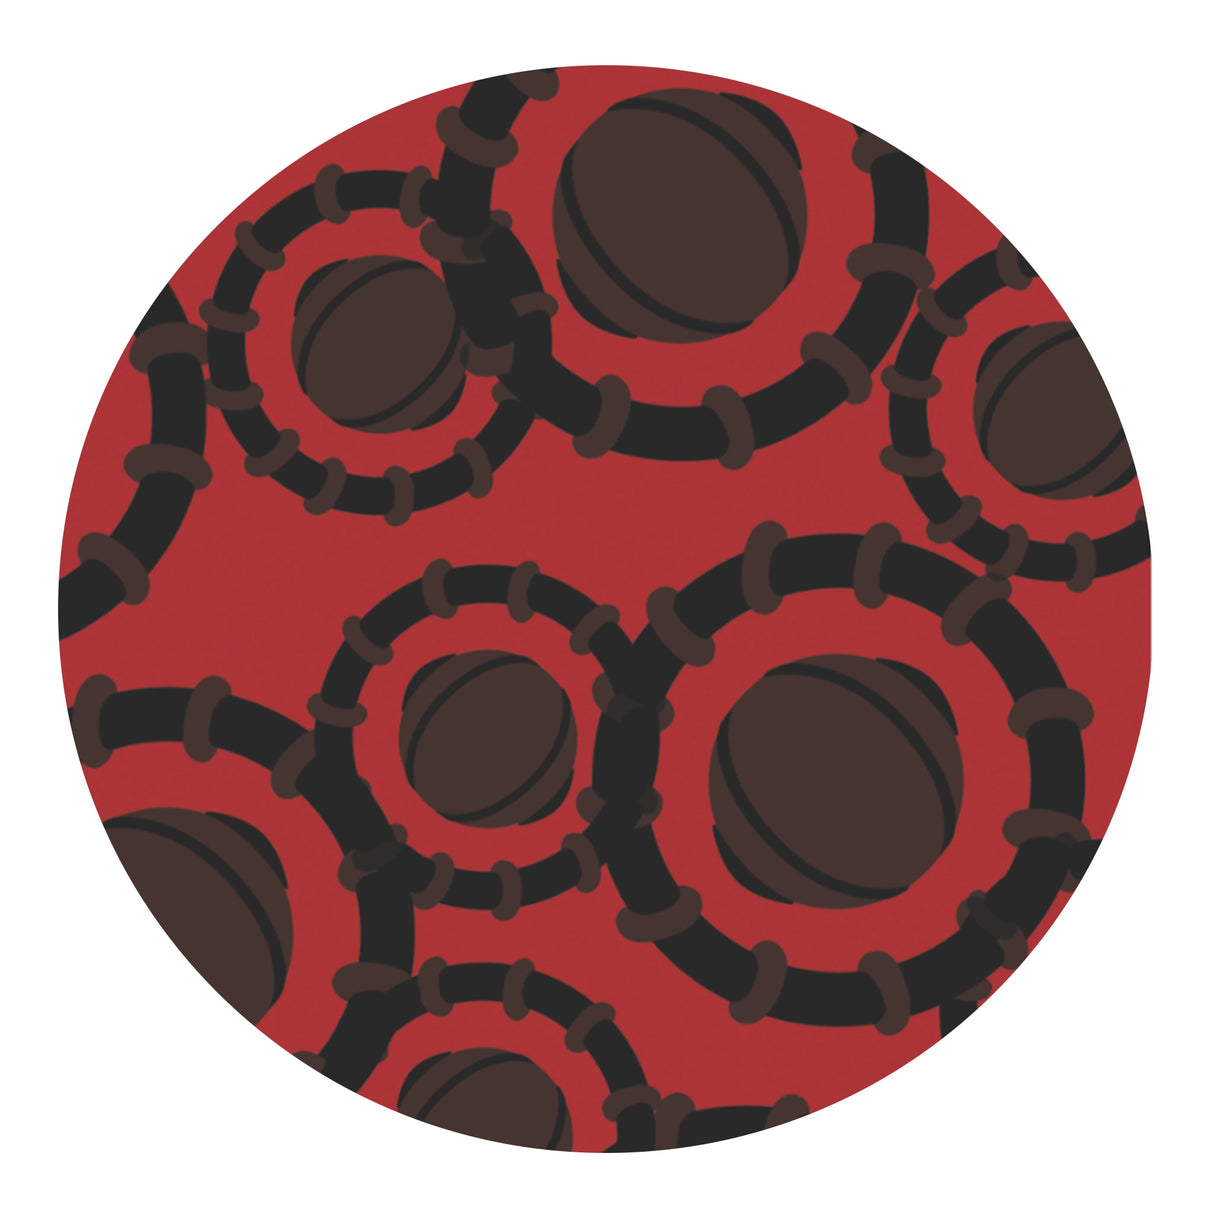 Circles All Around Sublimation Paper Print